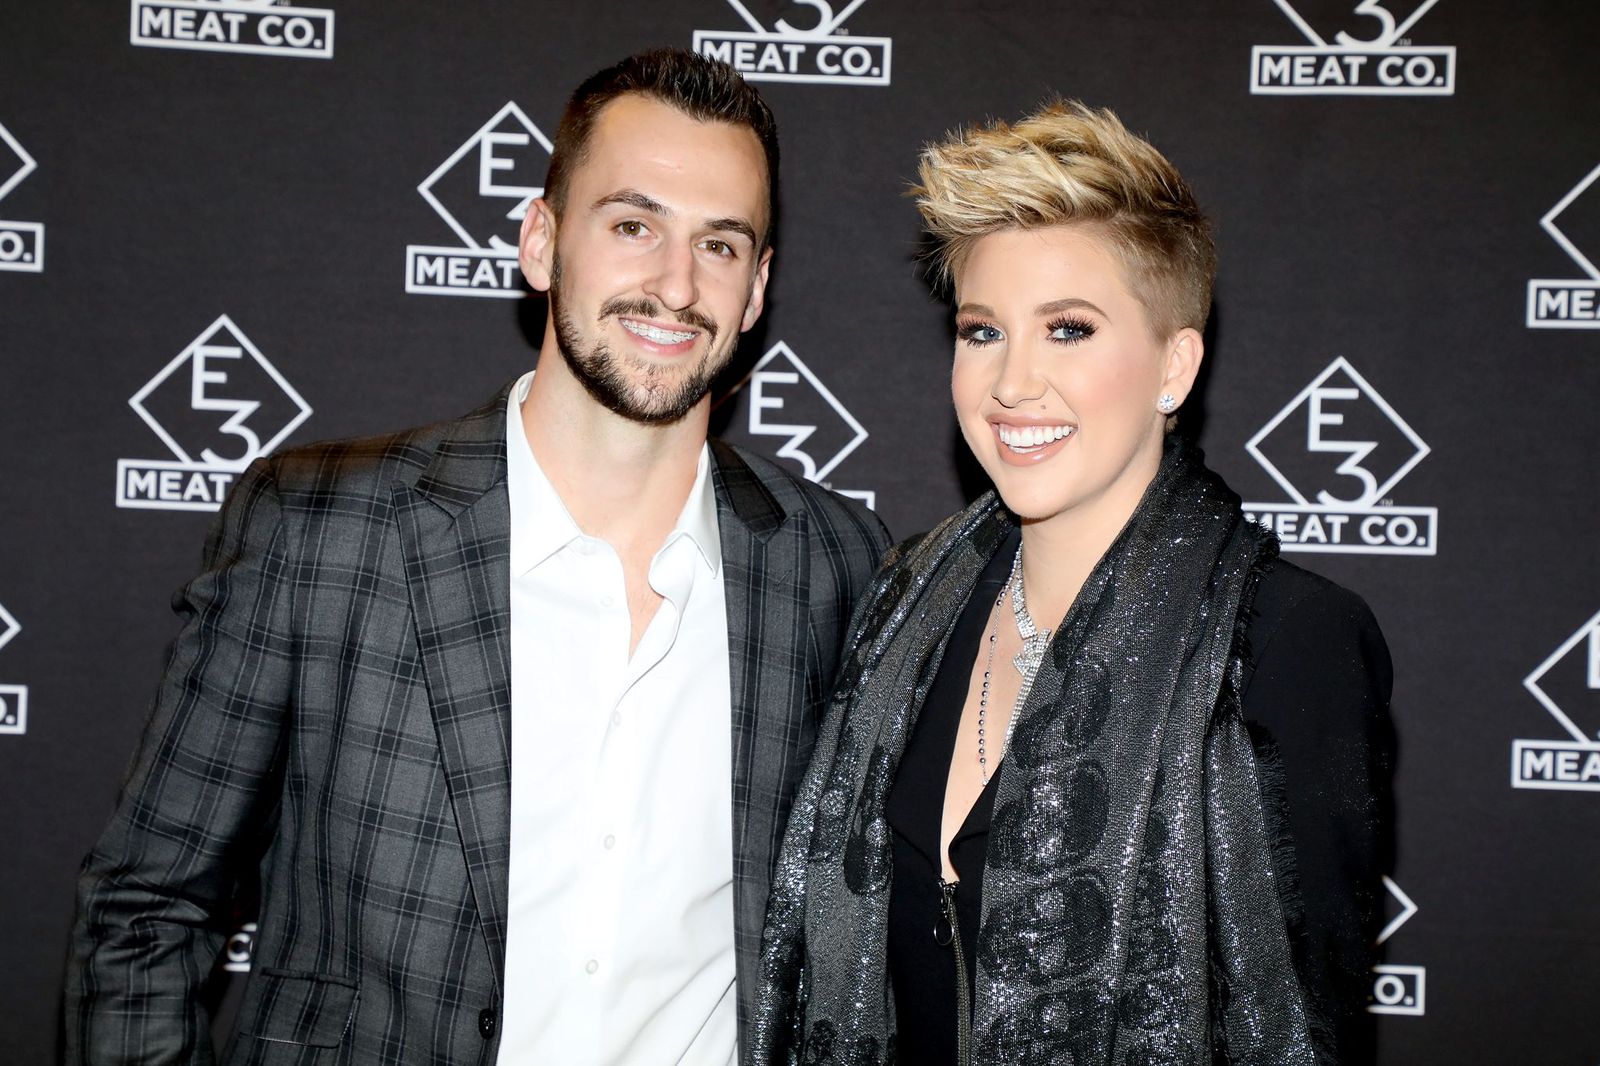 Nic Kerdiles and Savannah Chrisley at the grand opening of E3 Chophouse Nashville on November 20, 2019, in Nashville, Tennessee | Photo: Danielle Del Valle/Getty Images